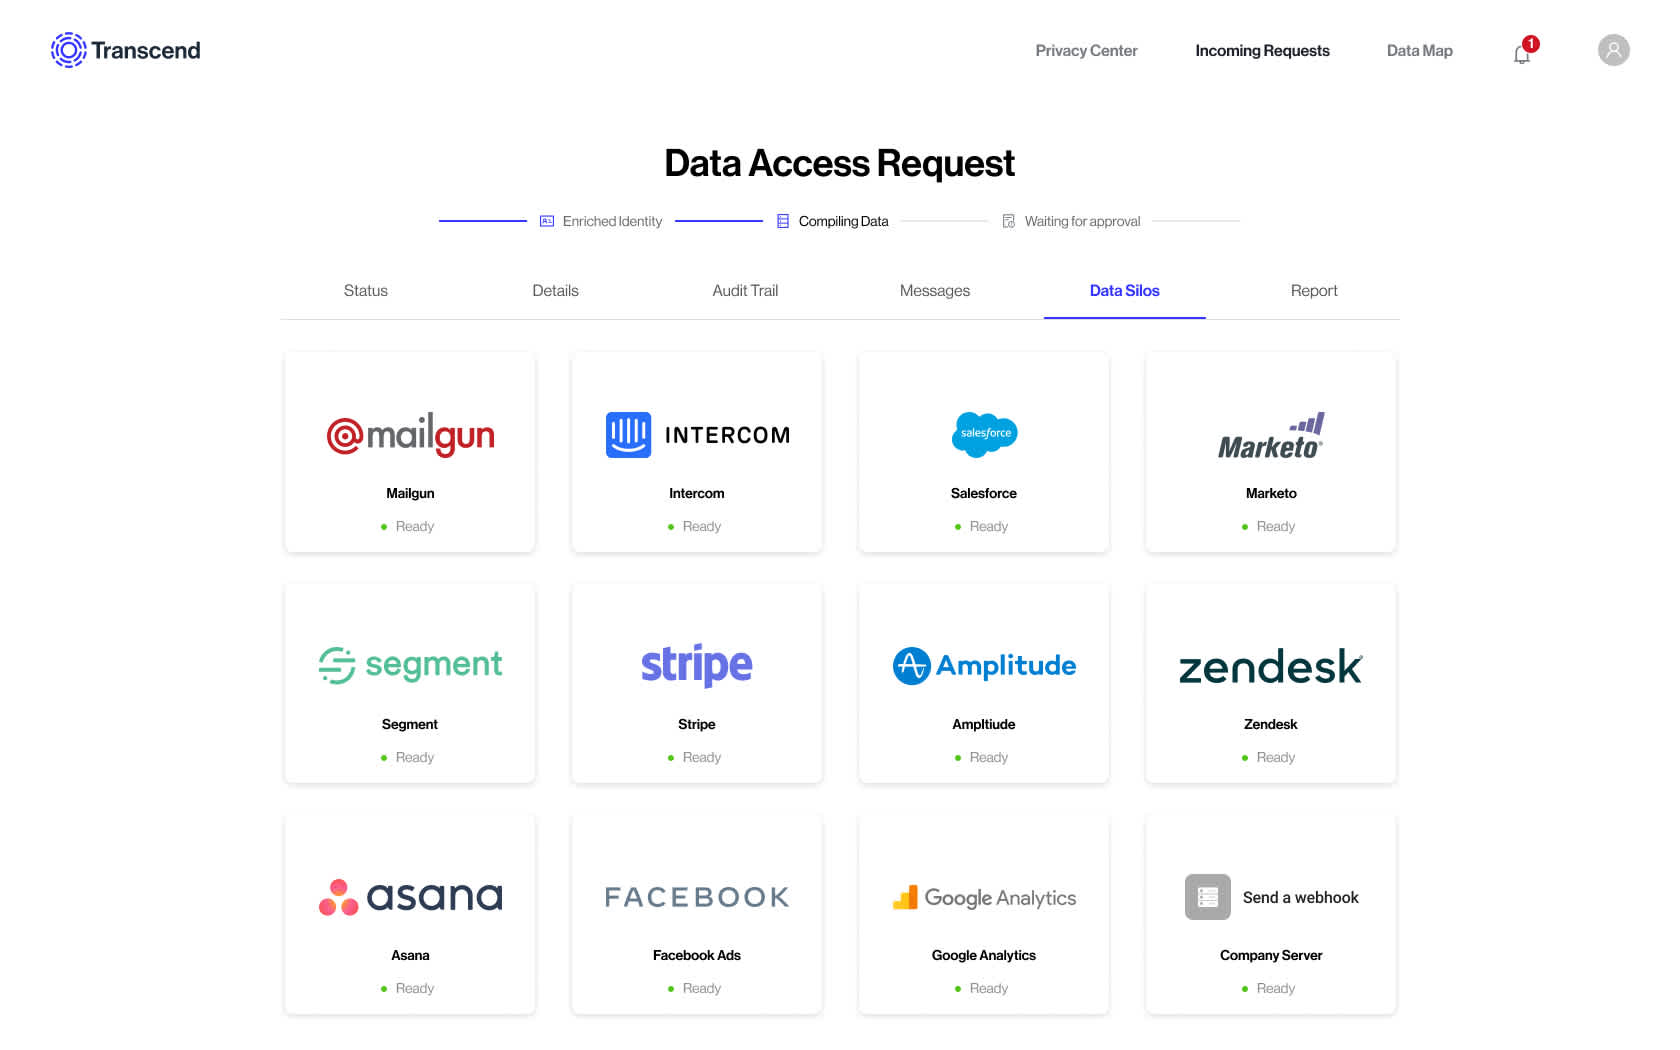 The data access request page on Transcend showing all data silos available.